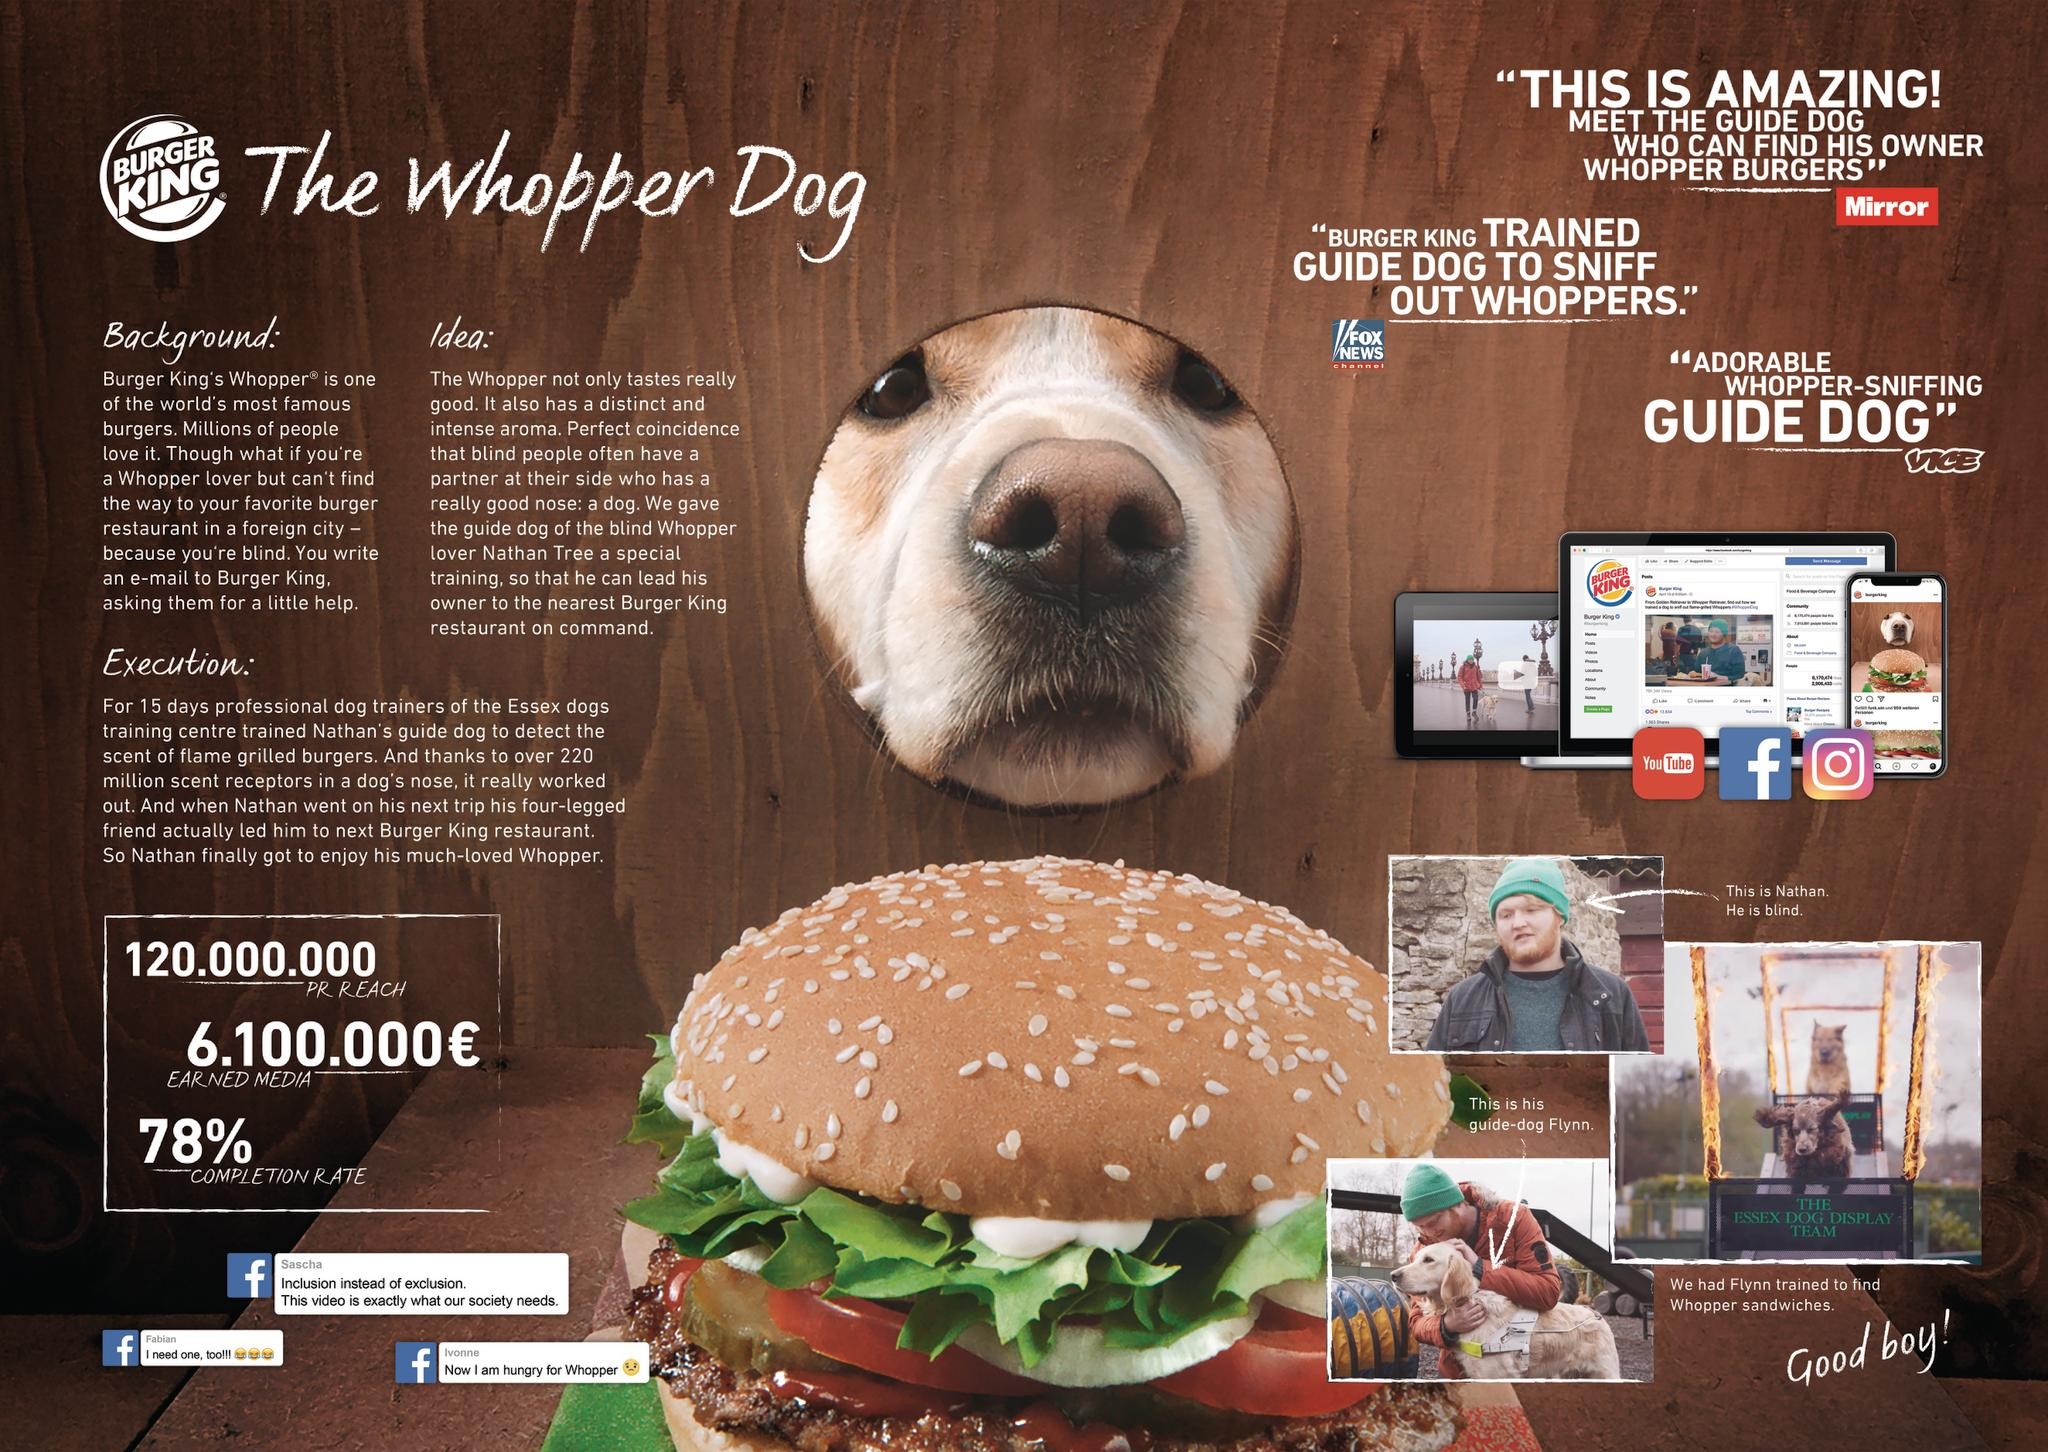 The Whopper Dog